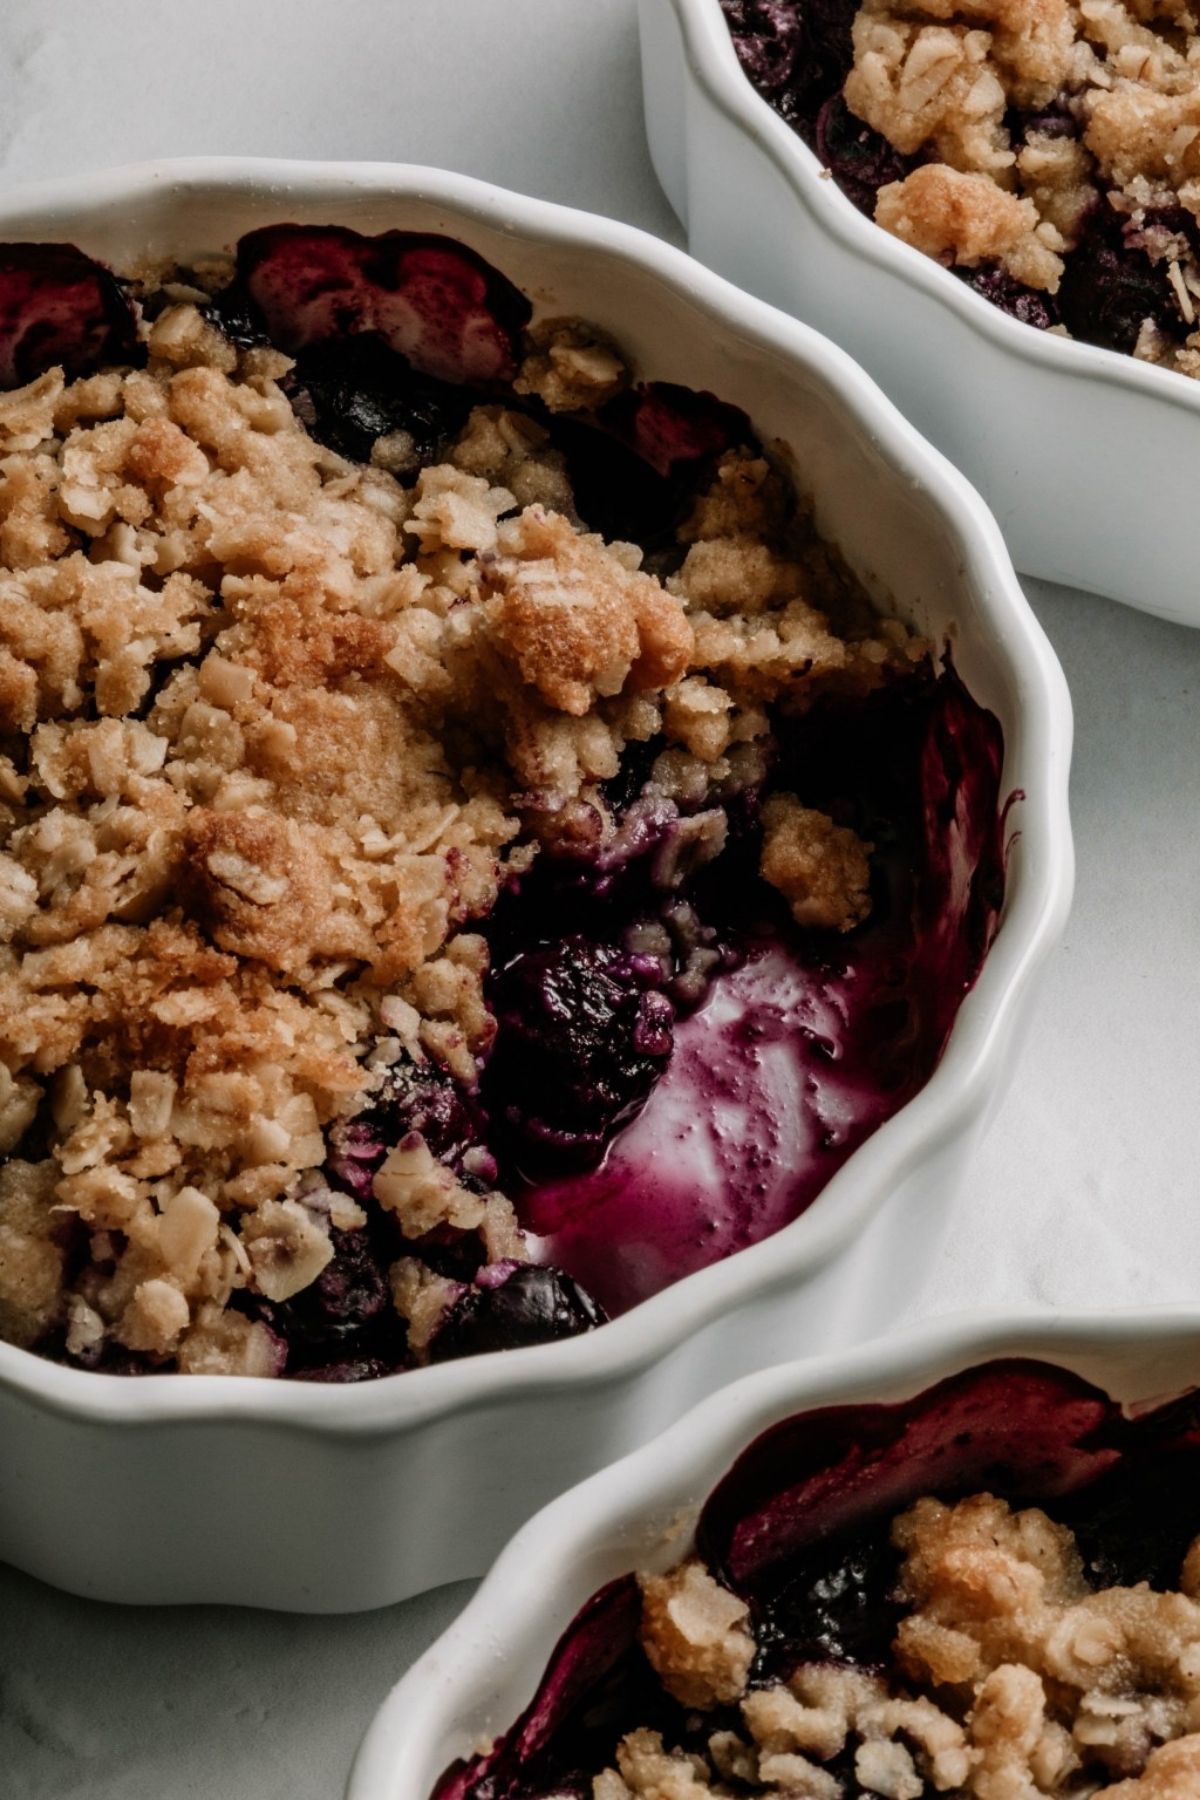 Close up of a single serving of blueberry crisp, with a few bites taken.